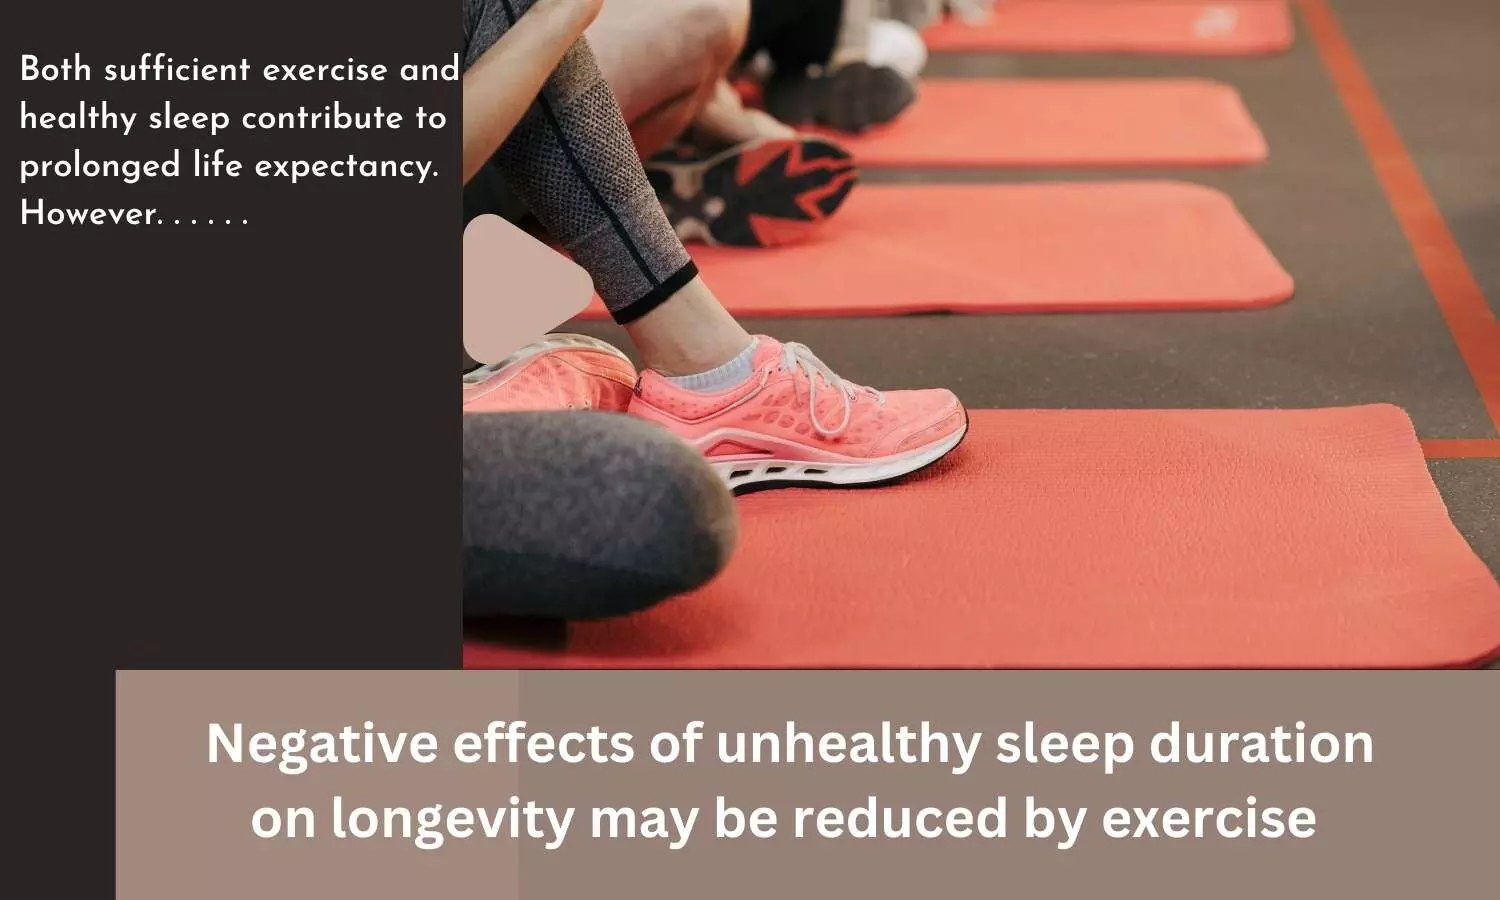 Negative effects of unhealthy sleep duration on longevity may be reduced by exercise